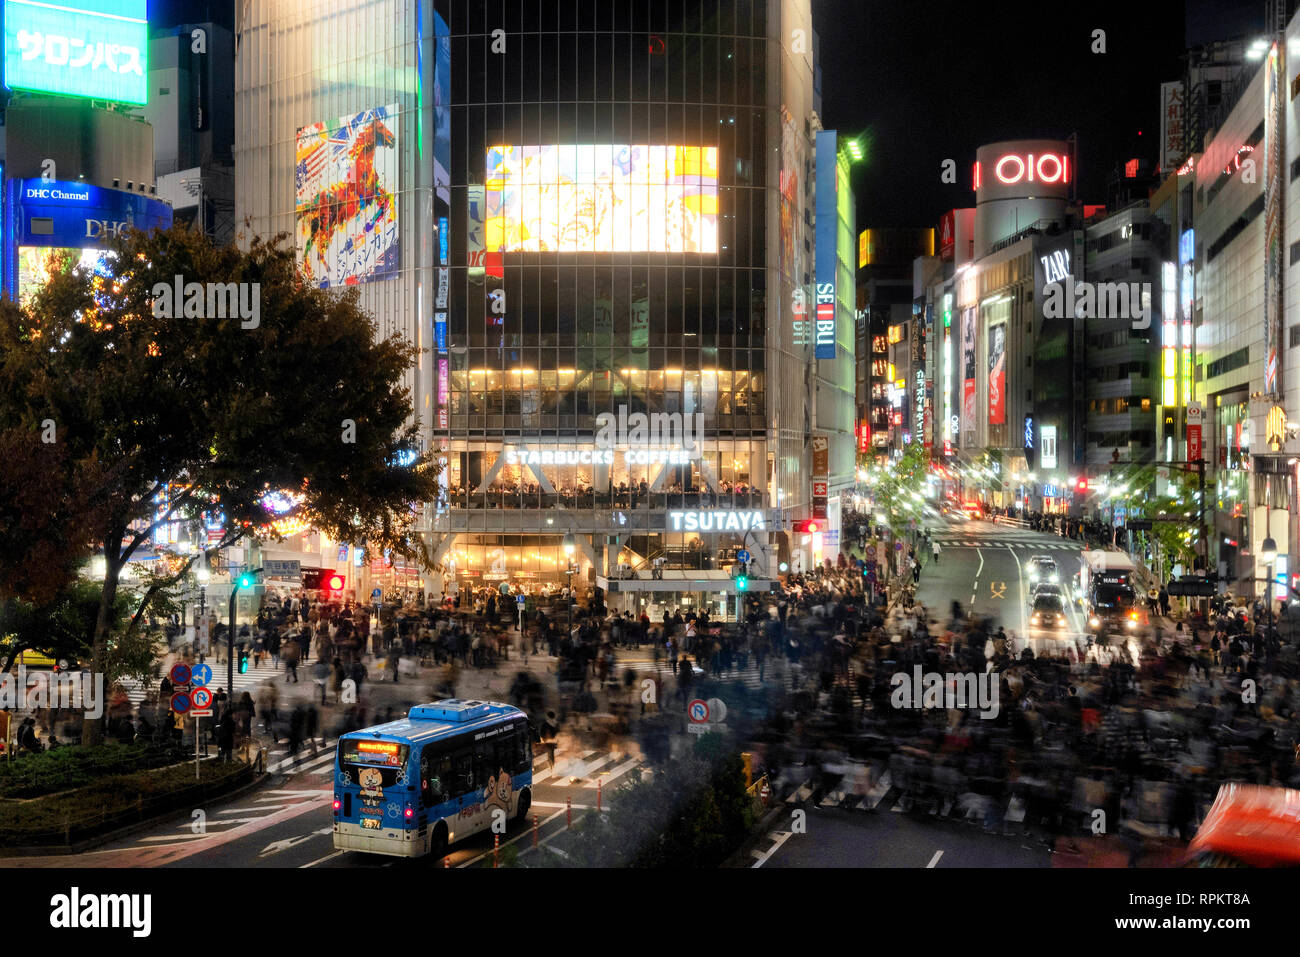 Slow exposure image of Shibuya Crossing in Tokyo, Japan as pedestrians cross the intersection Stock Photo